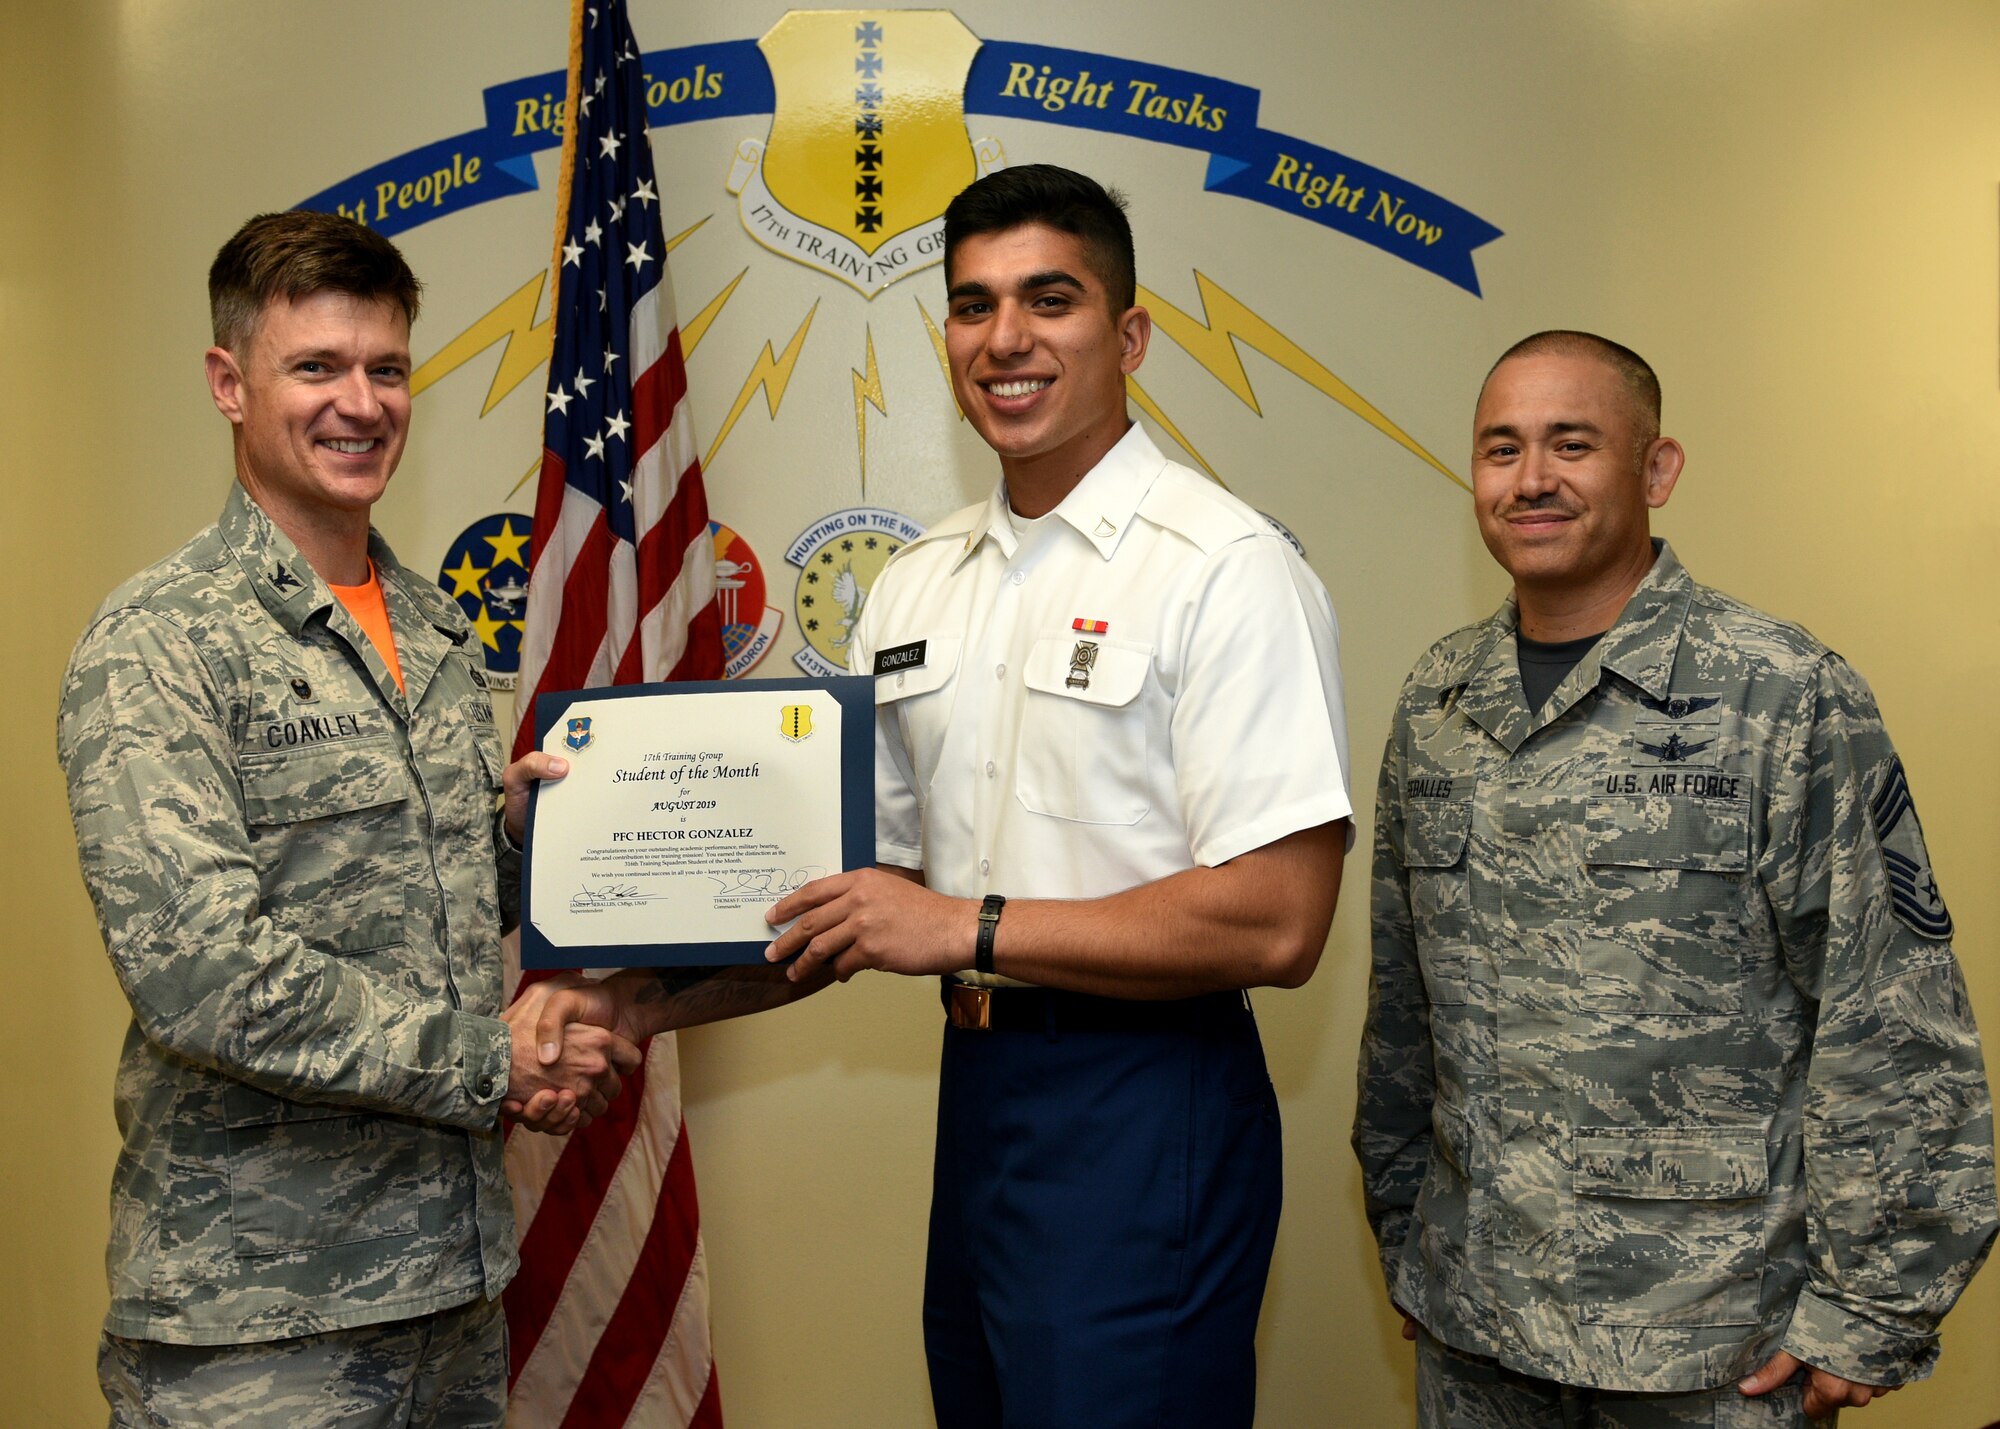 U.S. Air Force Col. Thomas Coakley, 17th Training Group commander, presents the 316th Training Squadron Student of the Month award to U.S. Army Pfc. Hector Gonzalez, 316th TRS student, at Brandenburg Hall on Goodfellow Air Force Base, Texas, September 6, 2019. The 316th TRS’s mission is to conduct U.S. Air Force, U.S. Army, U.S. Marine Corps, U.S. Navy and U.S. Coast Guard cryptologic, human intelligence and military training. (U.S. Air Force photo by Airman 1st Class Robyn Hunsinger/Released)